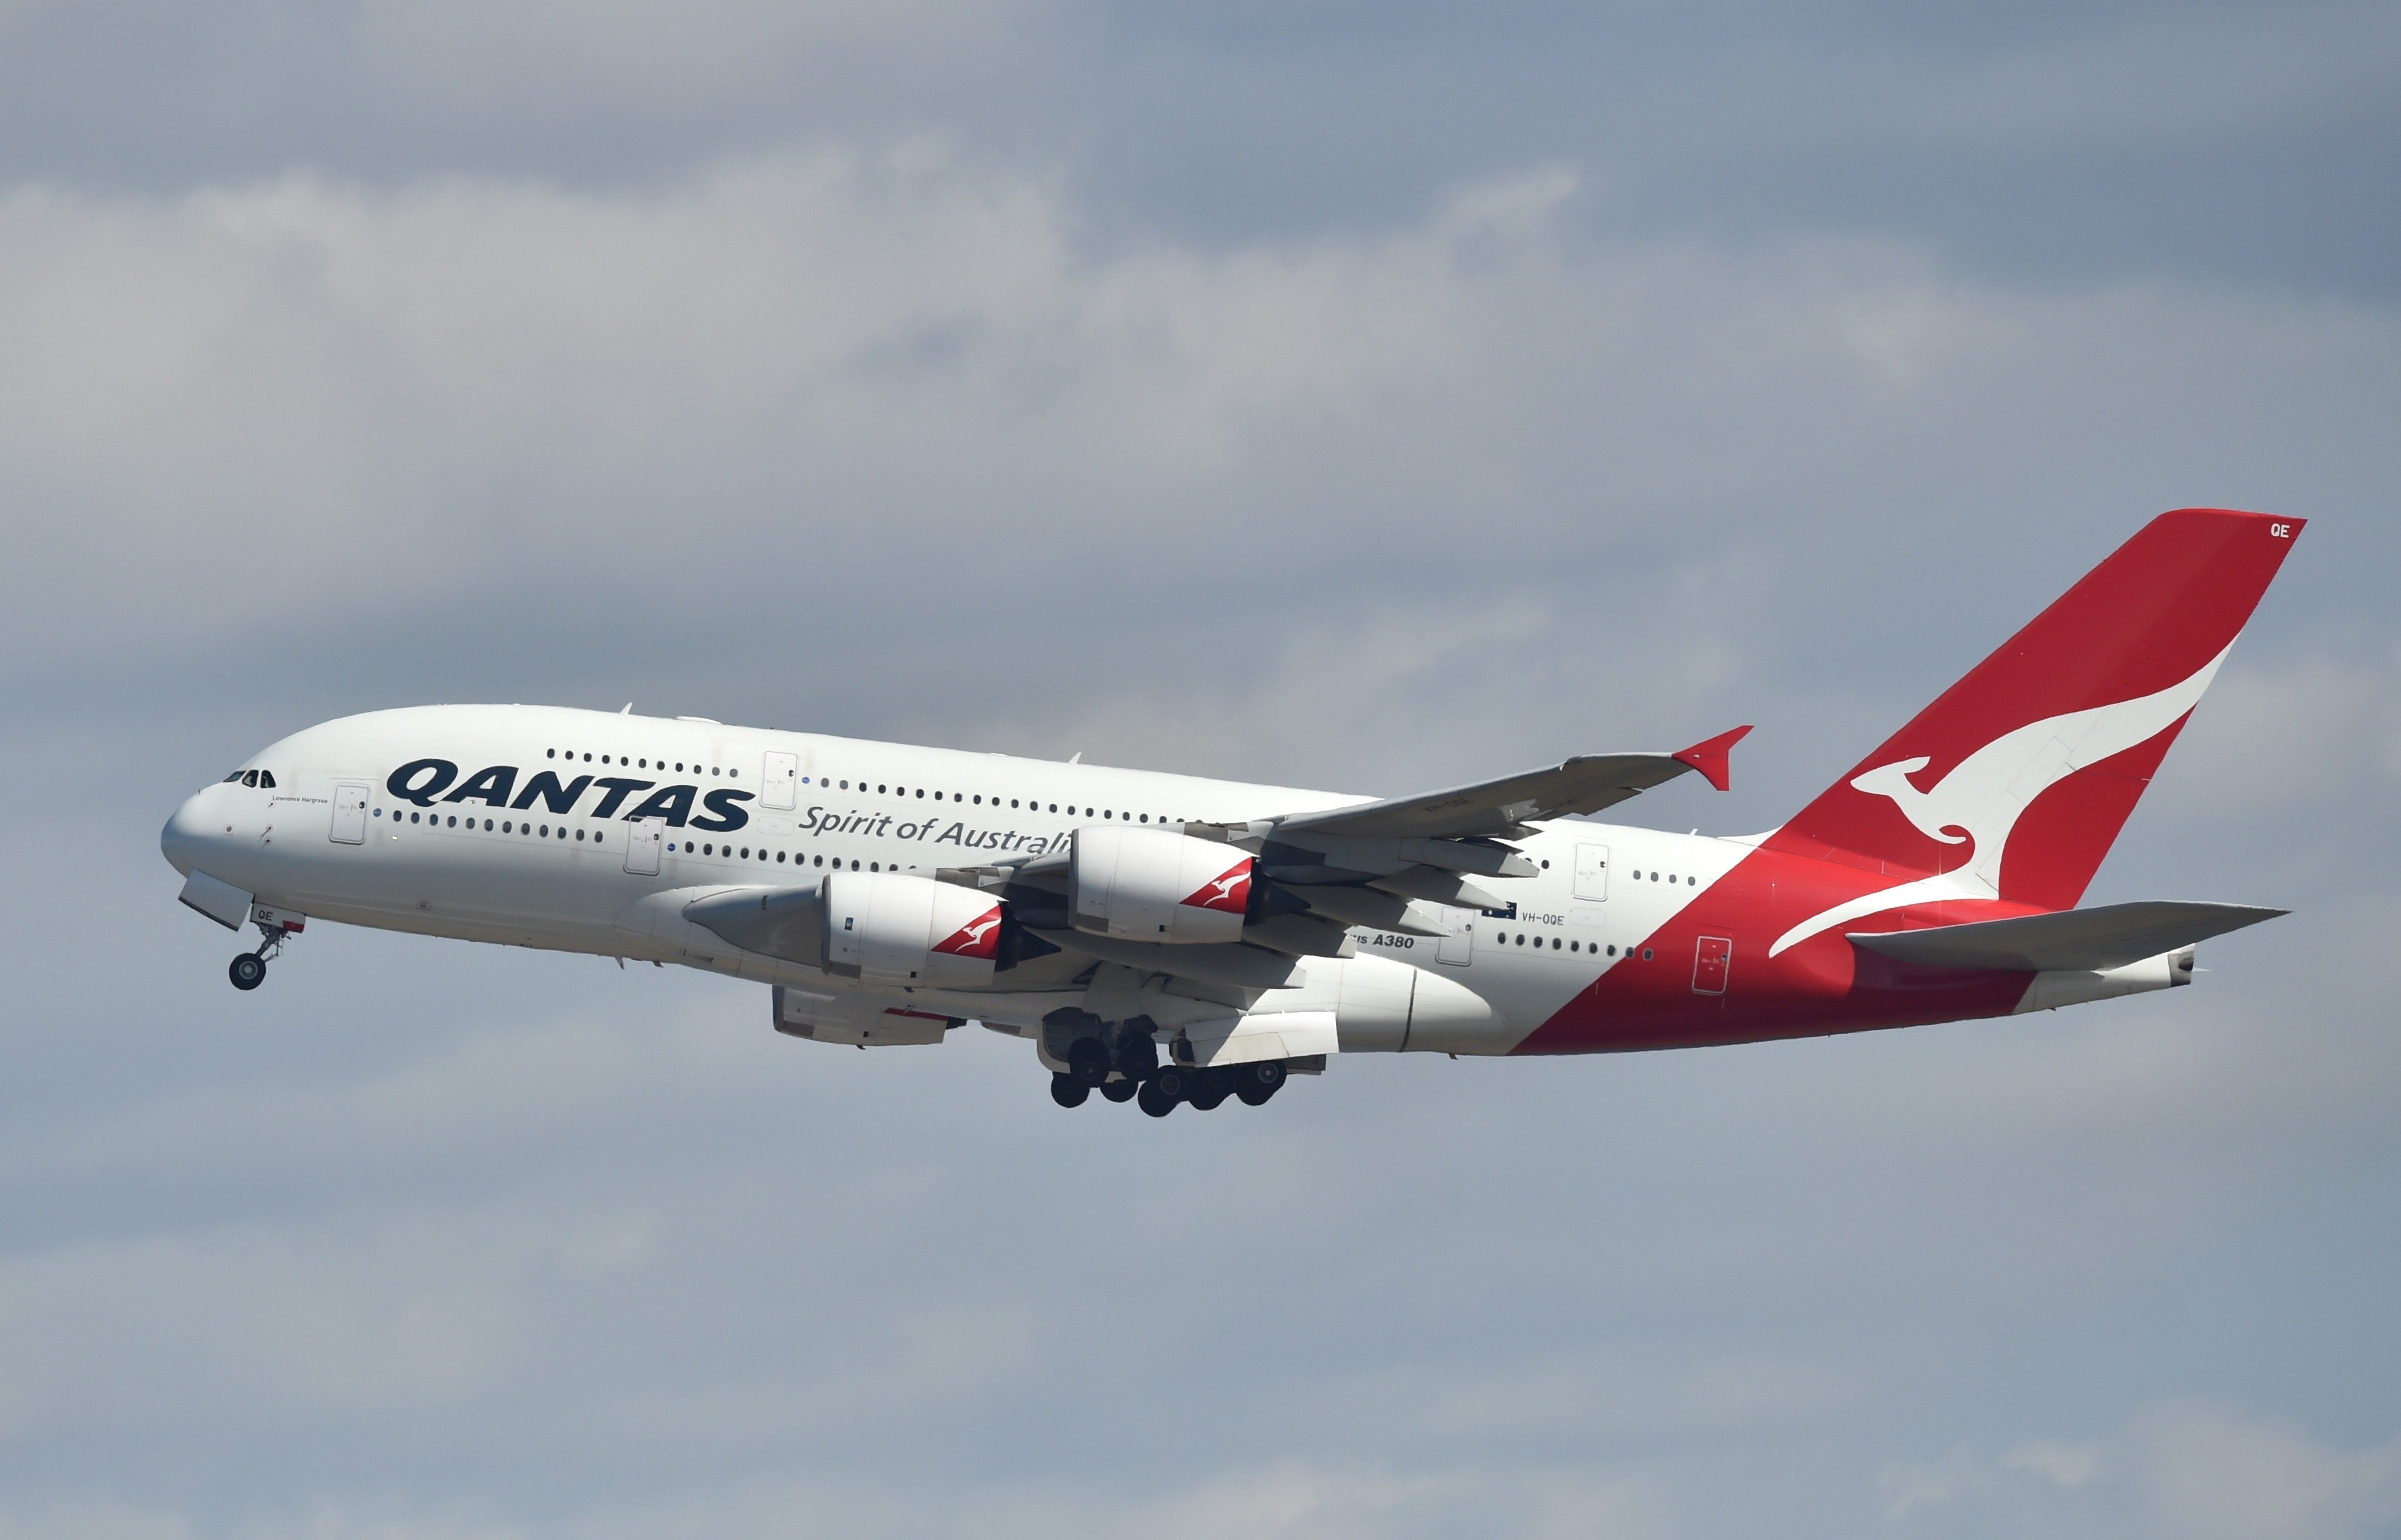 Qantas has announced it would curtail its China flights due to the coronavirus outbreak. Photo: AFP